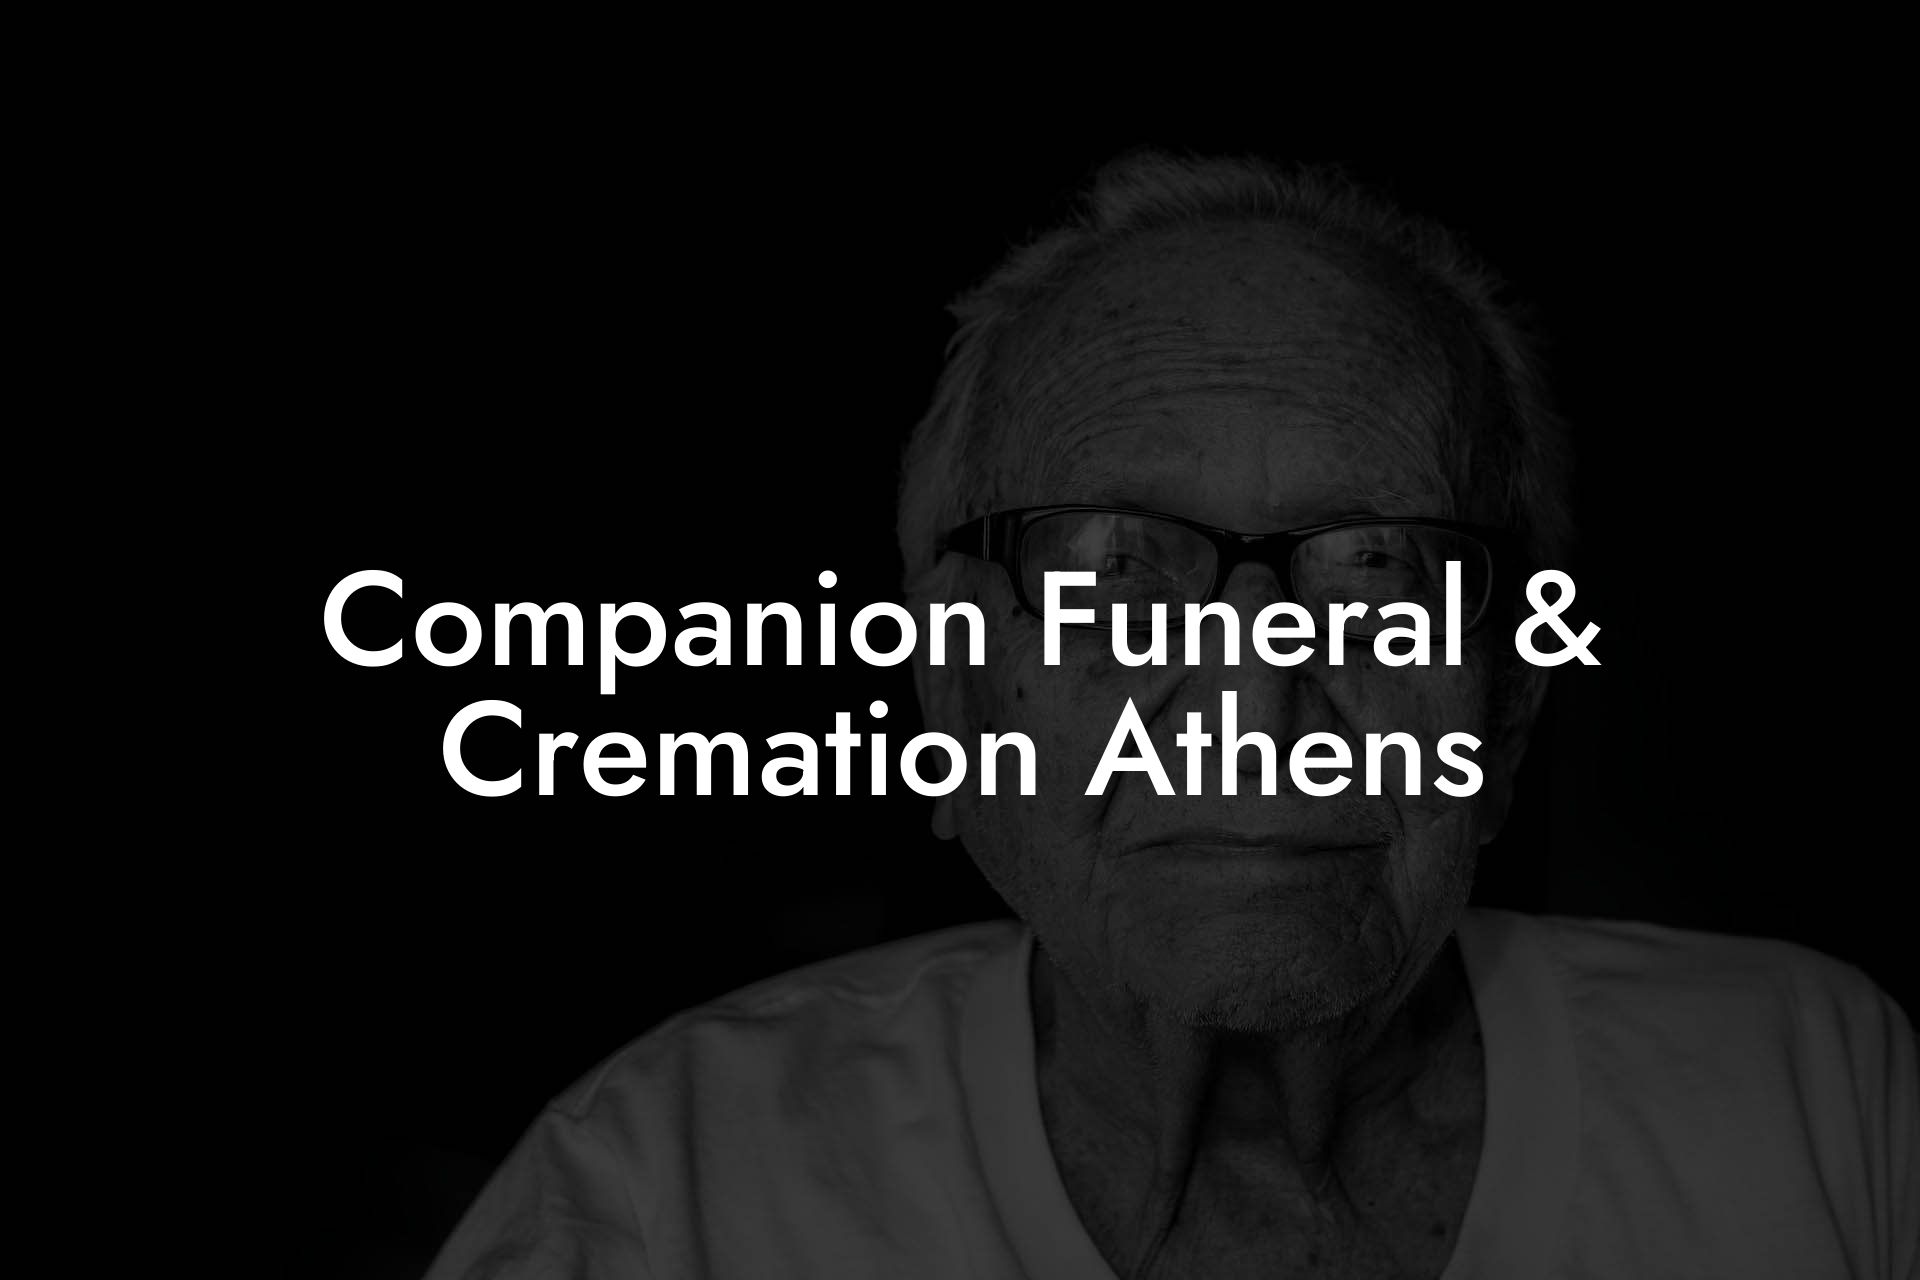 Companion Funeral & Cremation Athens